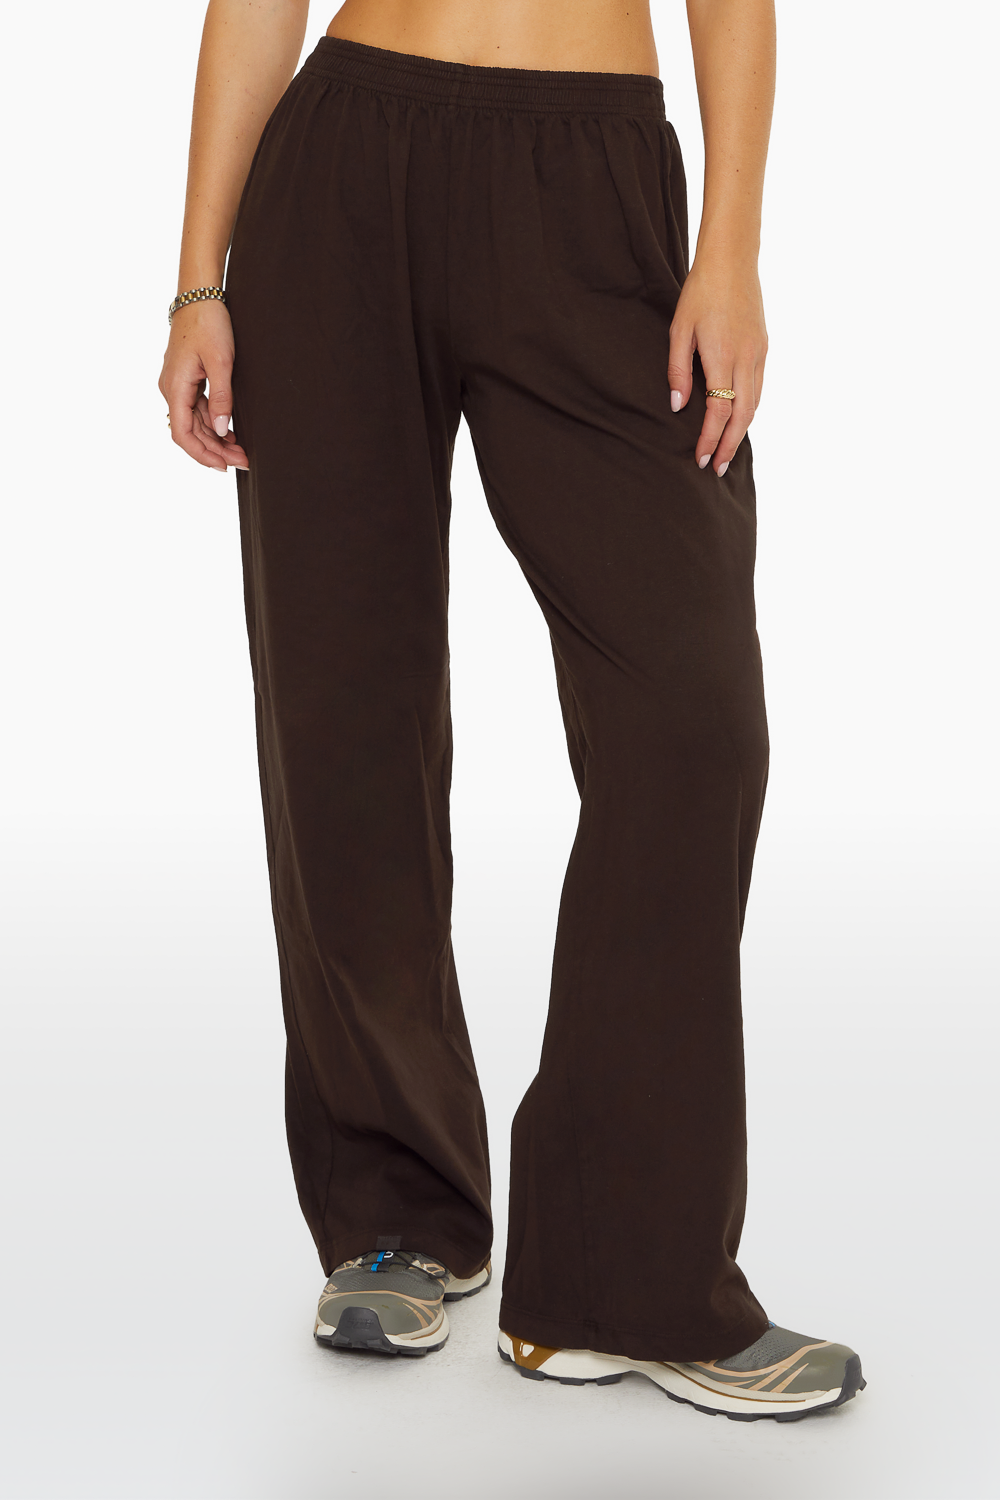 HEAVY COTTON EASY PANTS - ESPRESSO Featured Image